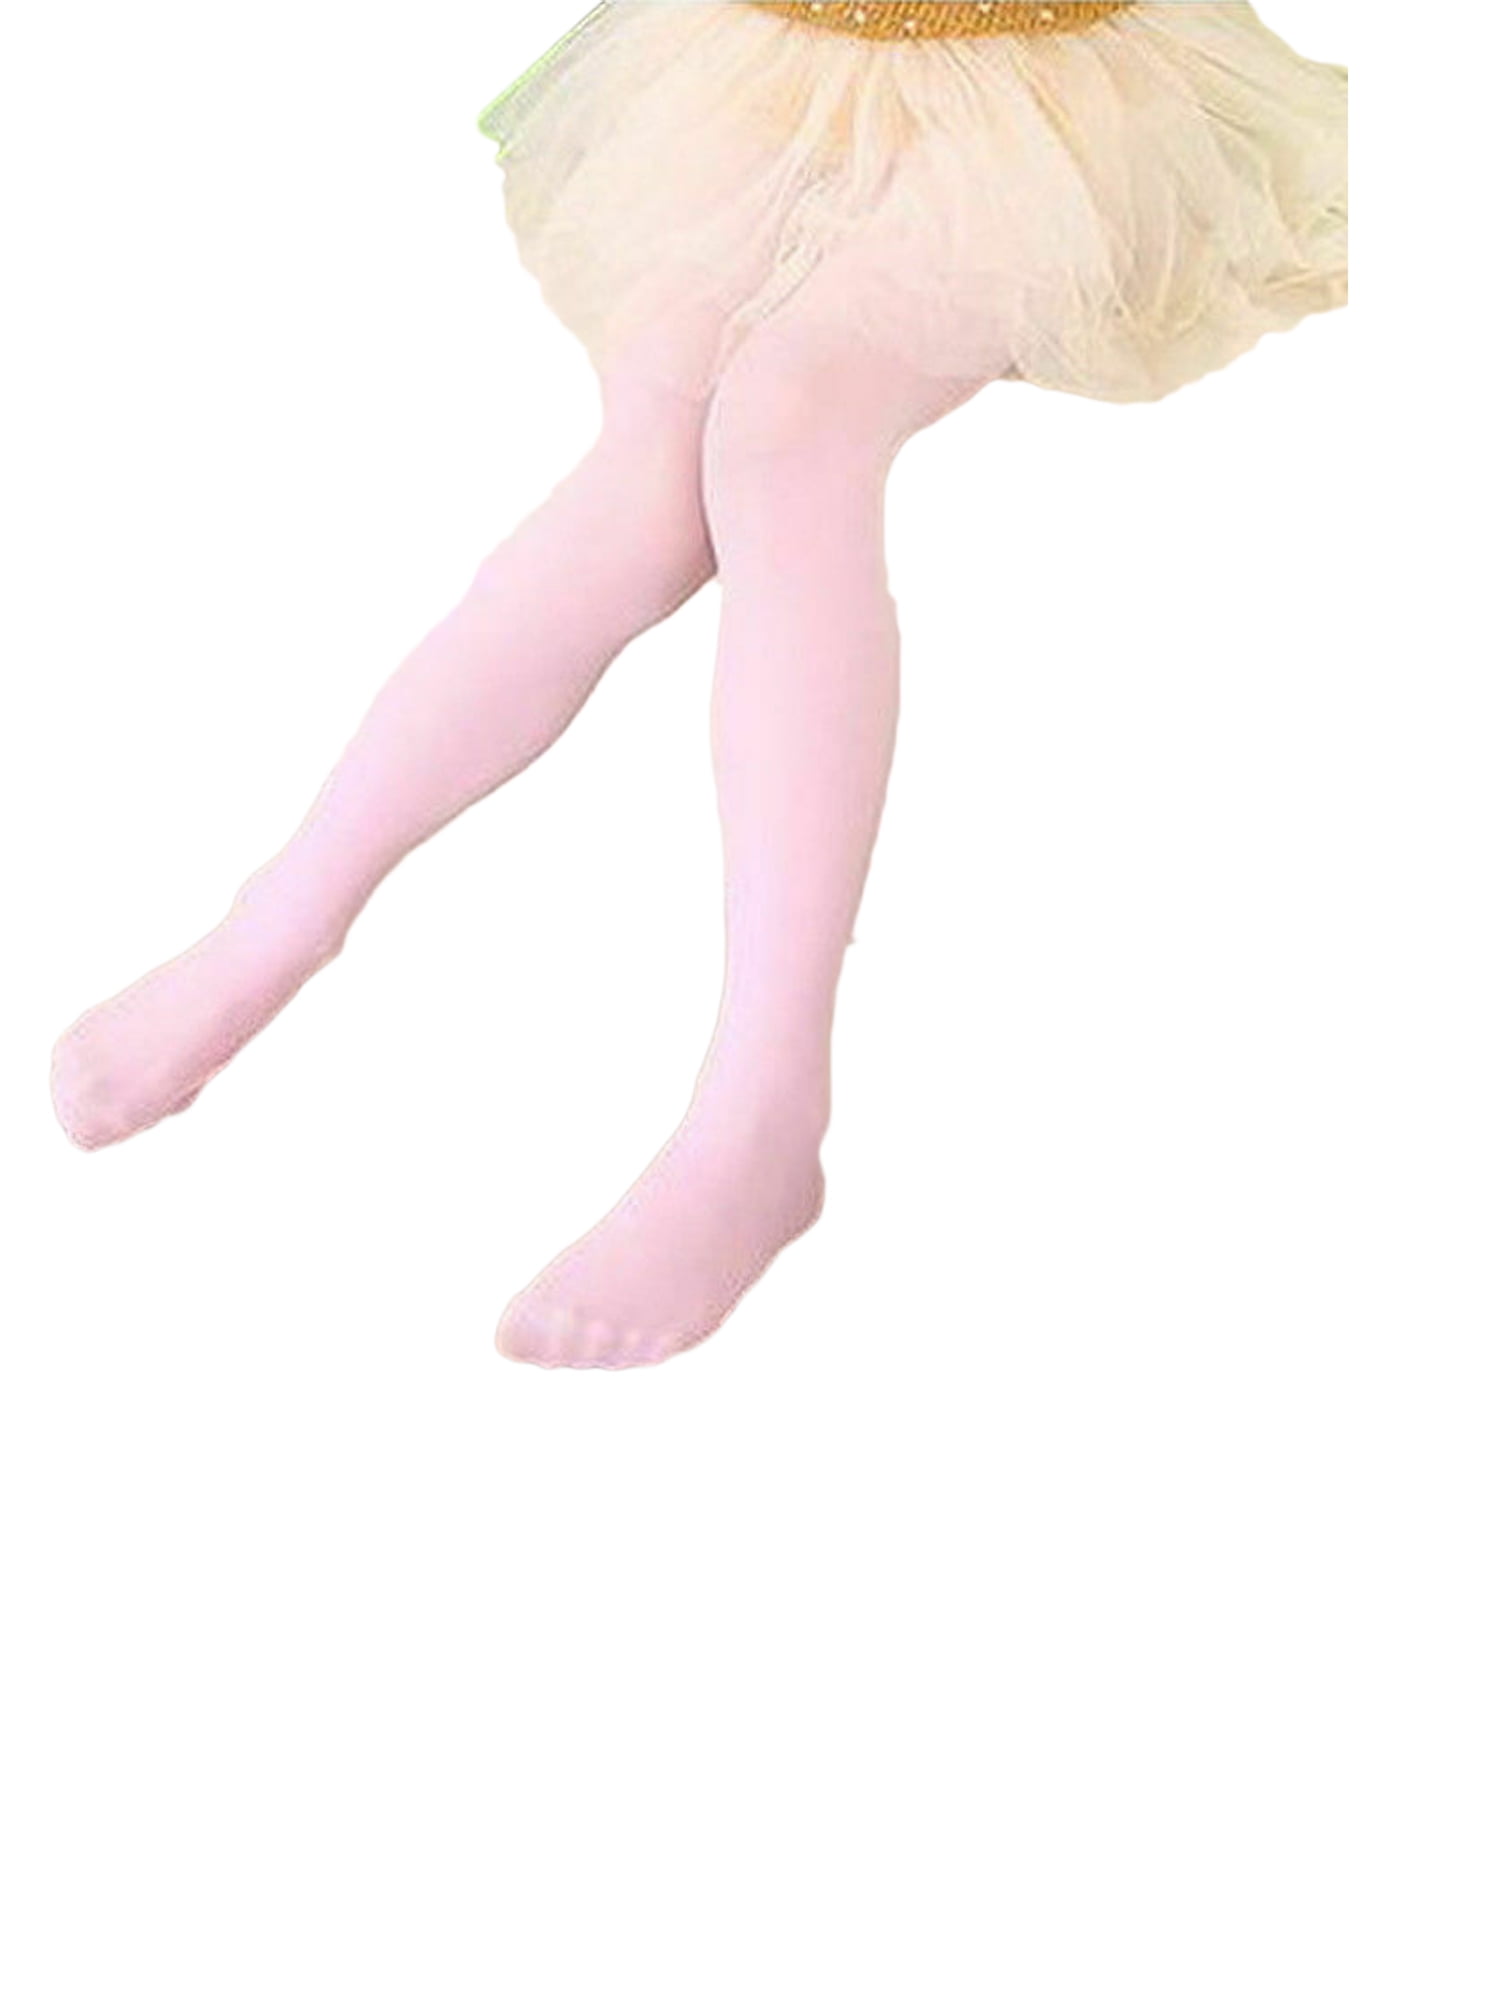 Convertible Tights Dance Stocking Socks Ballet Pantyhose for Kids & Adults-S M L 